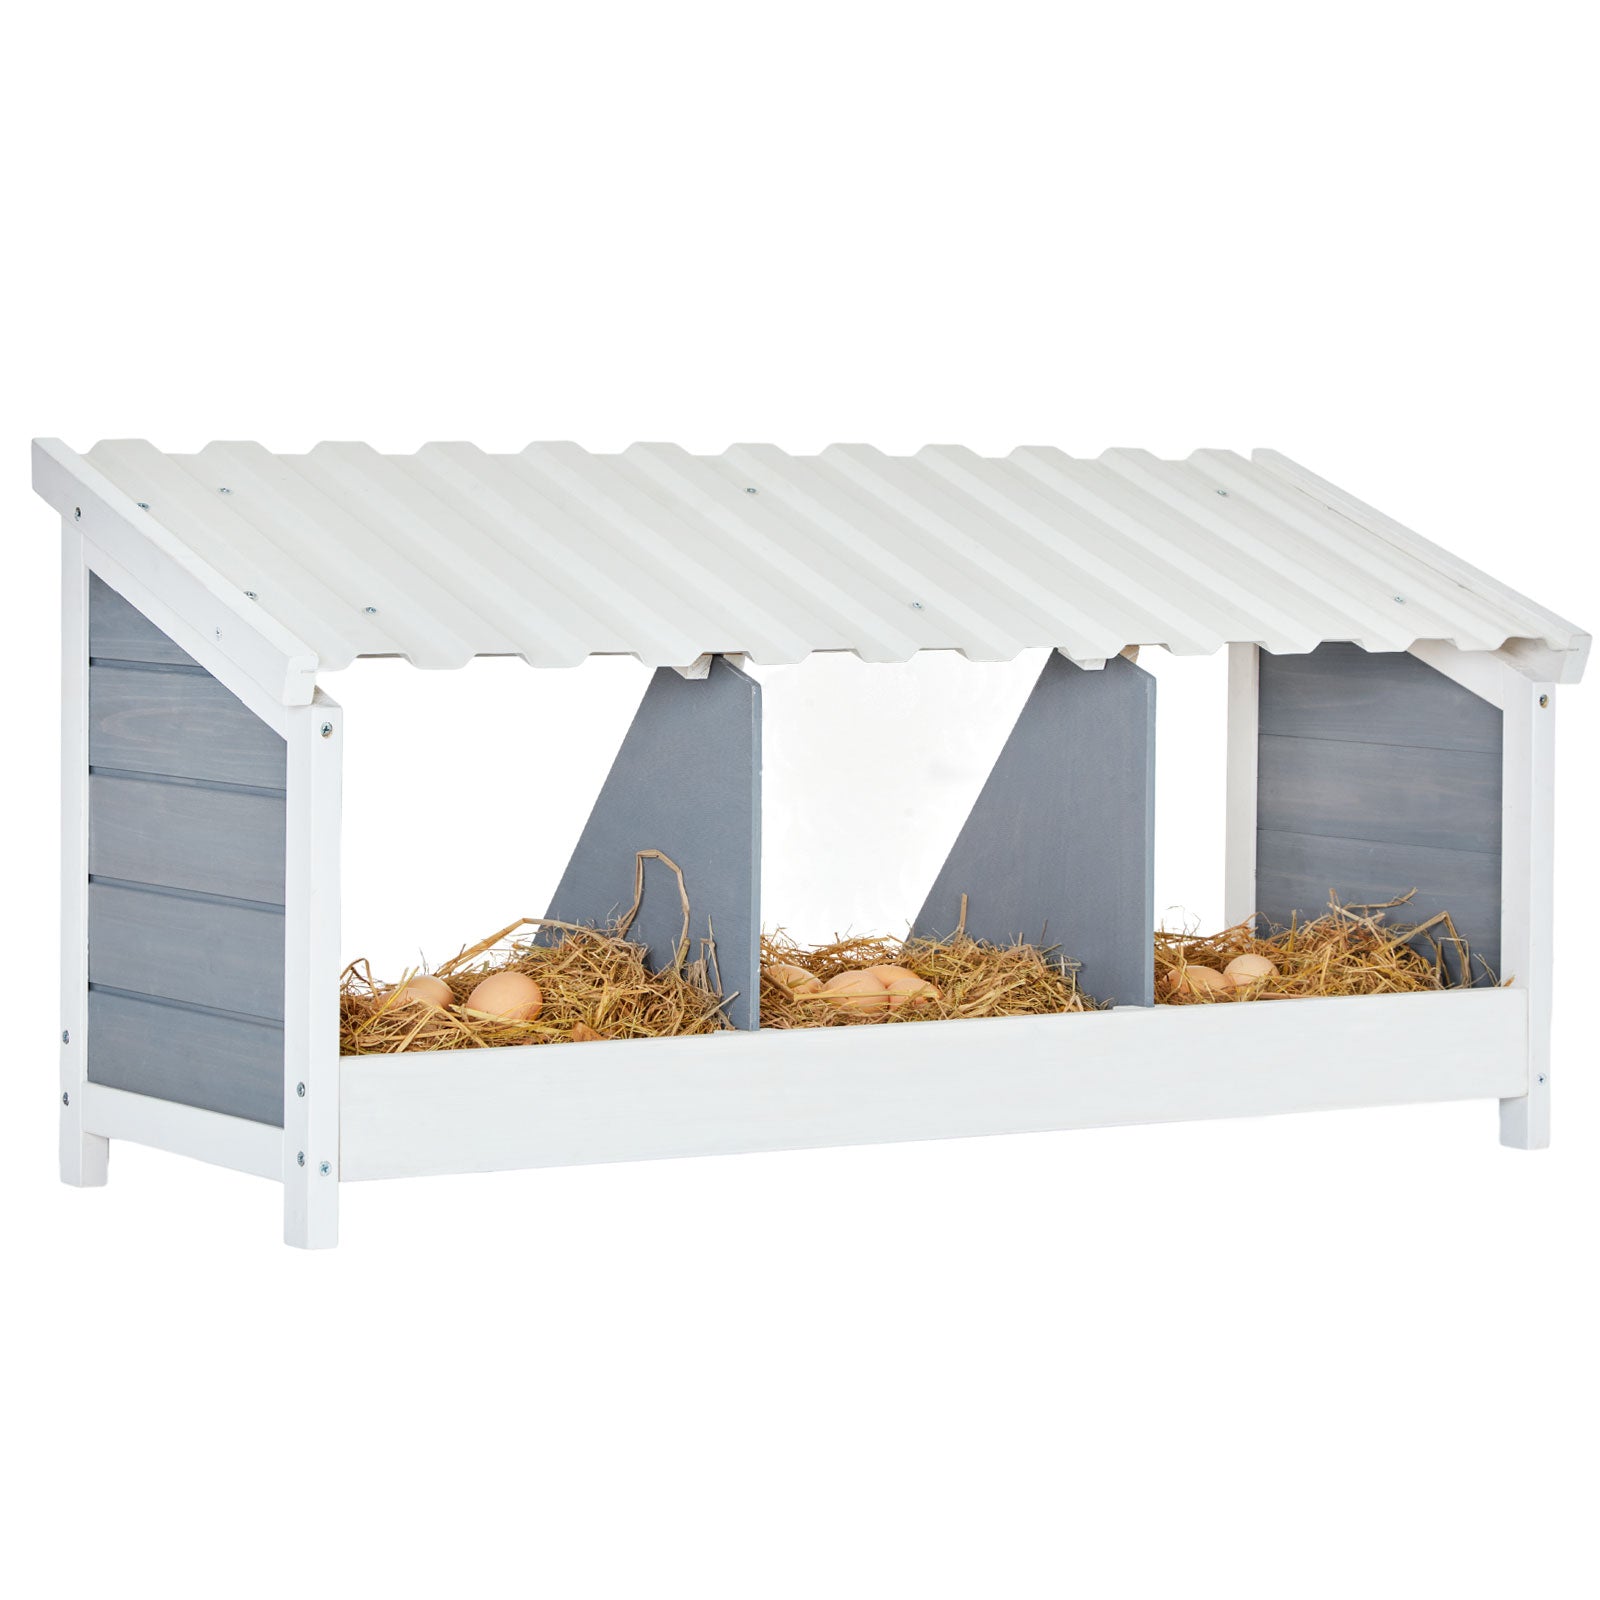 petsfit-triple-chicken-nesting-box-chicken-coop-accessories-with-pvc-roofing-versatile-use-wood-nesting-boxes-for-hens-easy-to-assemble-01